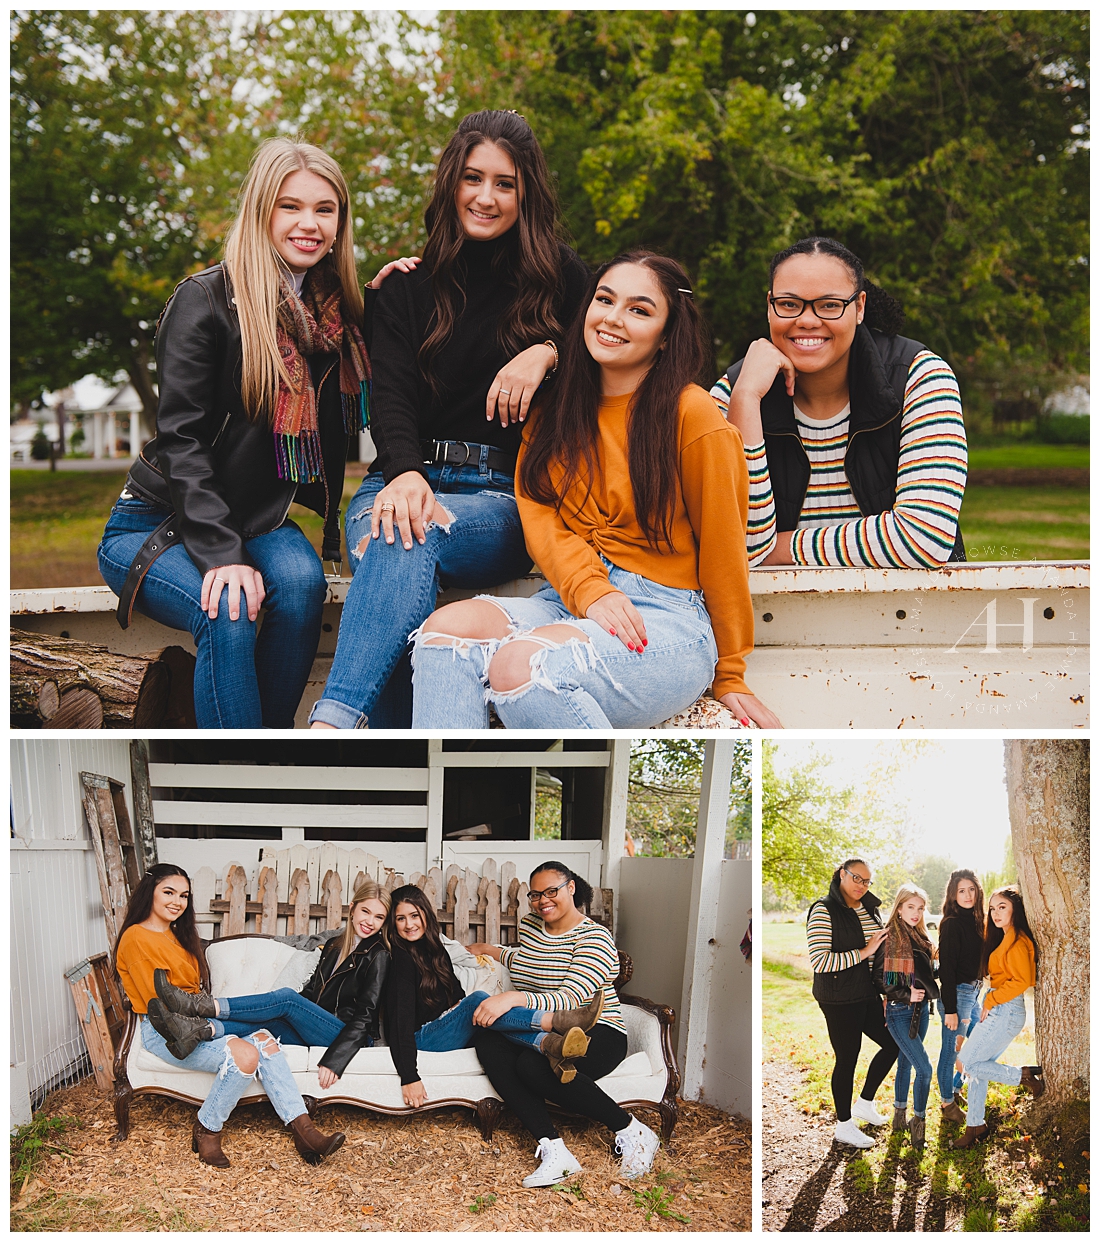 The Best Way to Remember your Senior Year | Group Portrait Sessions with the AHP Model Team photographed by Amanda Howse